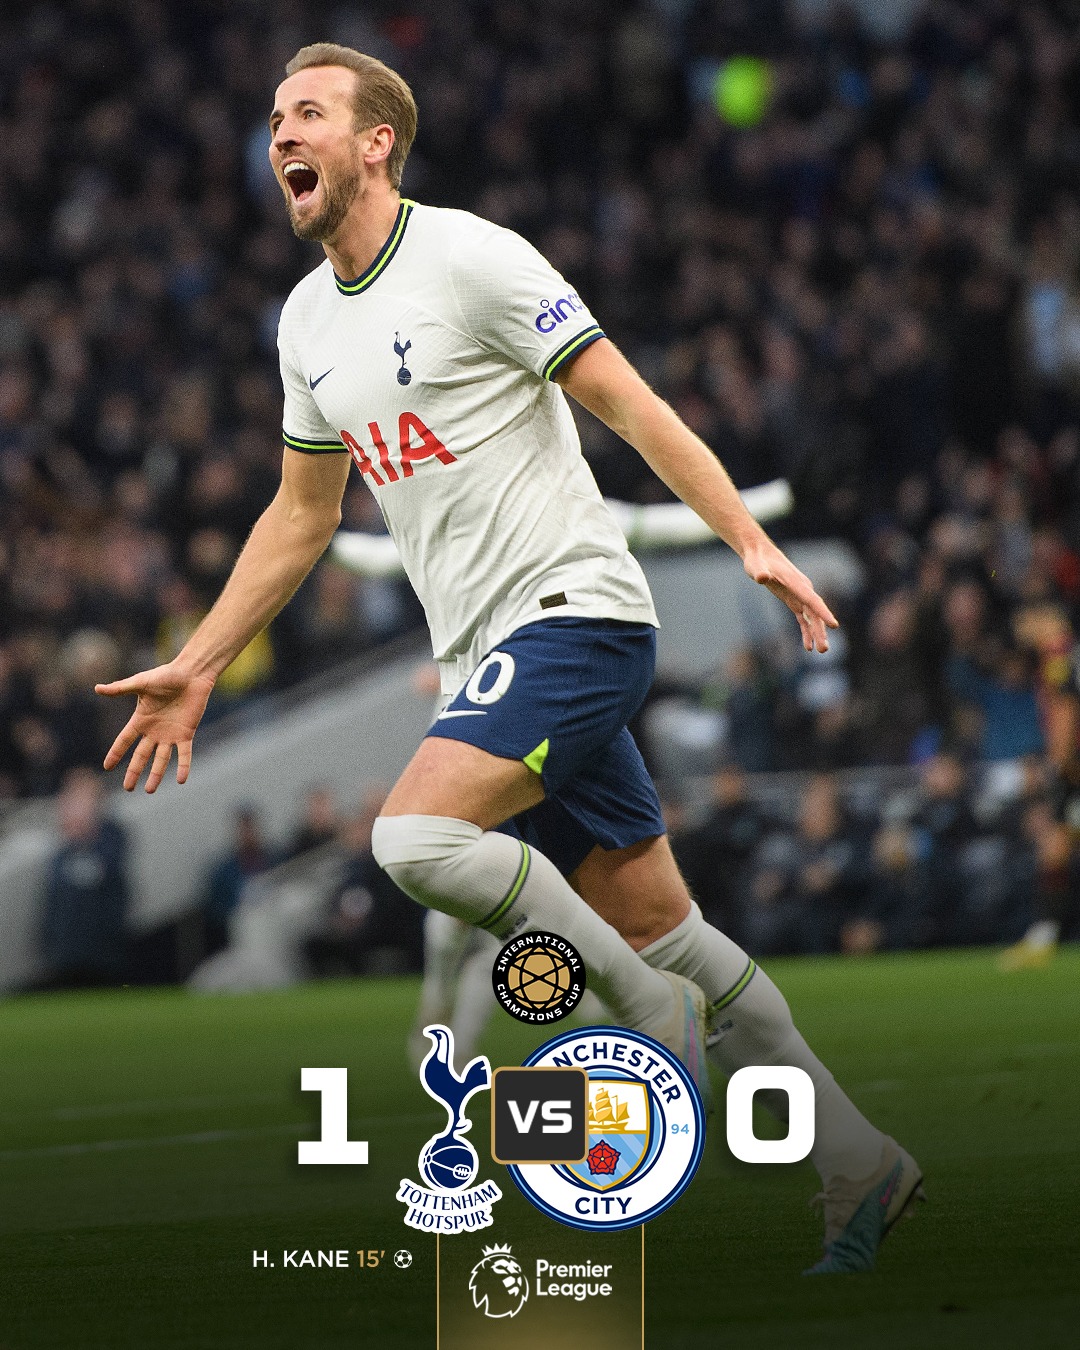 International Champions Cup on Twitter: "This victory a lot for Tottenham, Kane...and Arsenal too https://t.co/GSR6zmBvw0" / Twitter